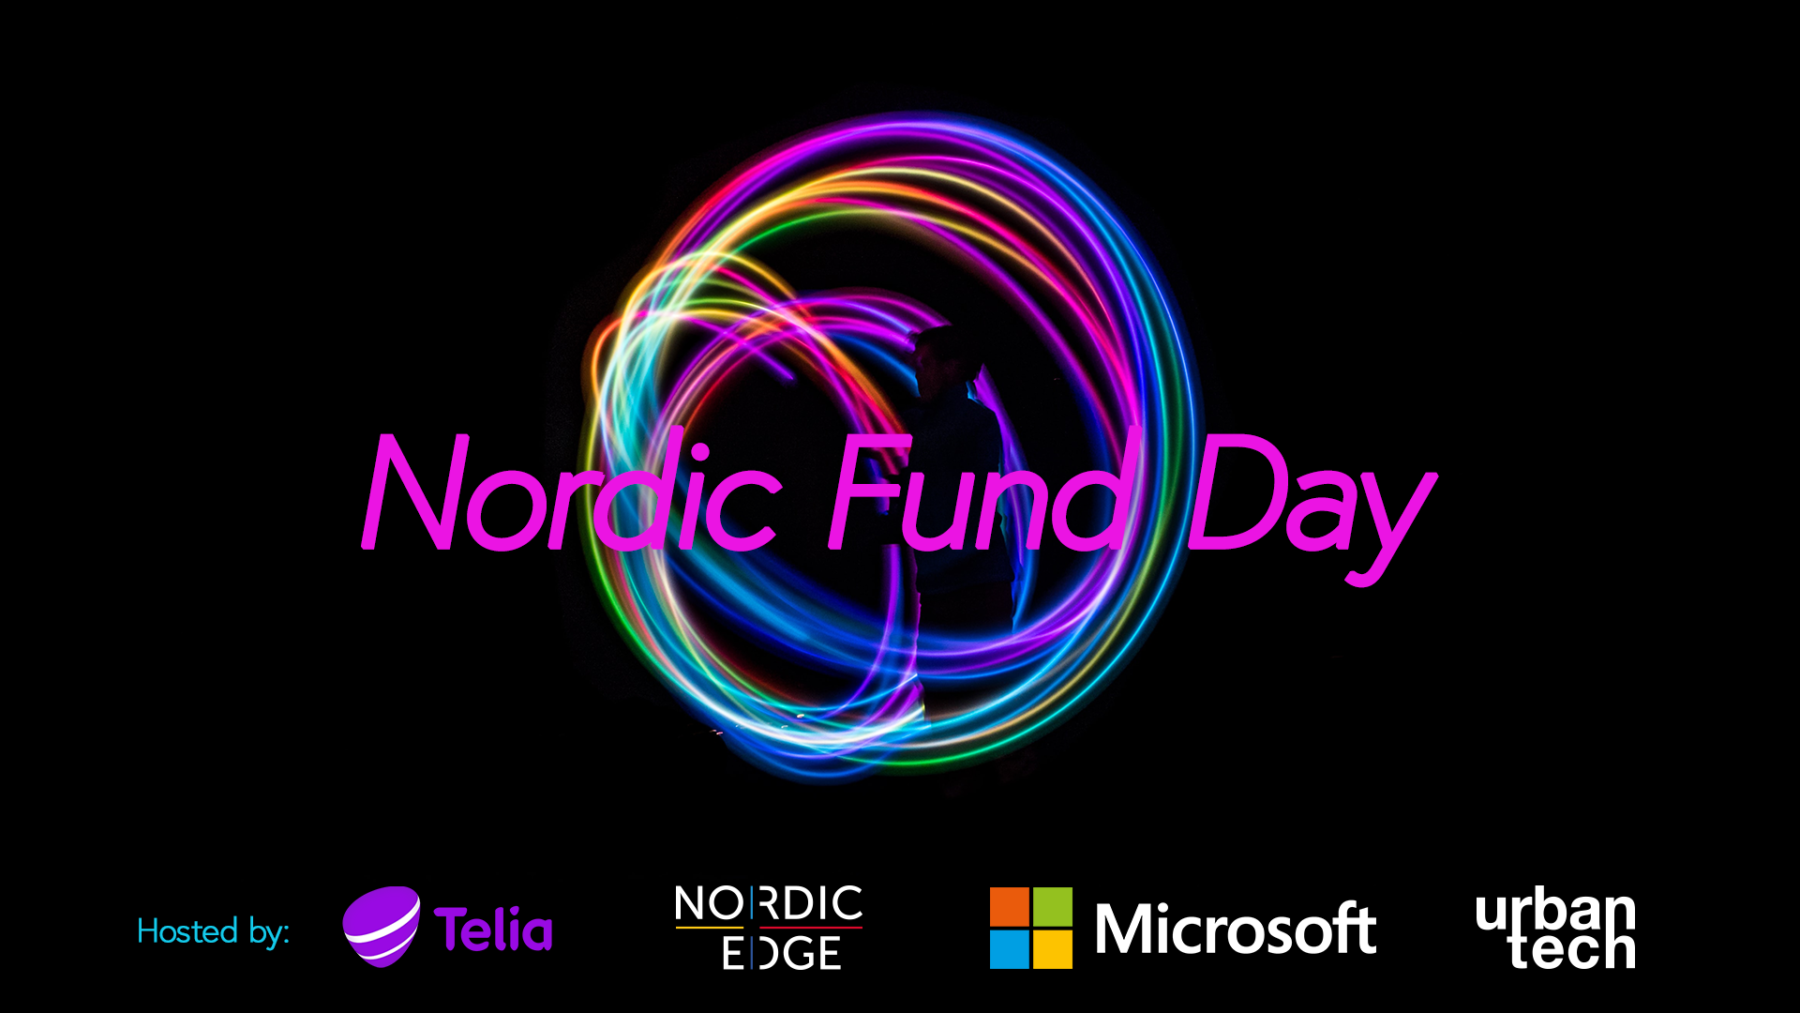 Nordic Fund Day